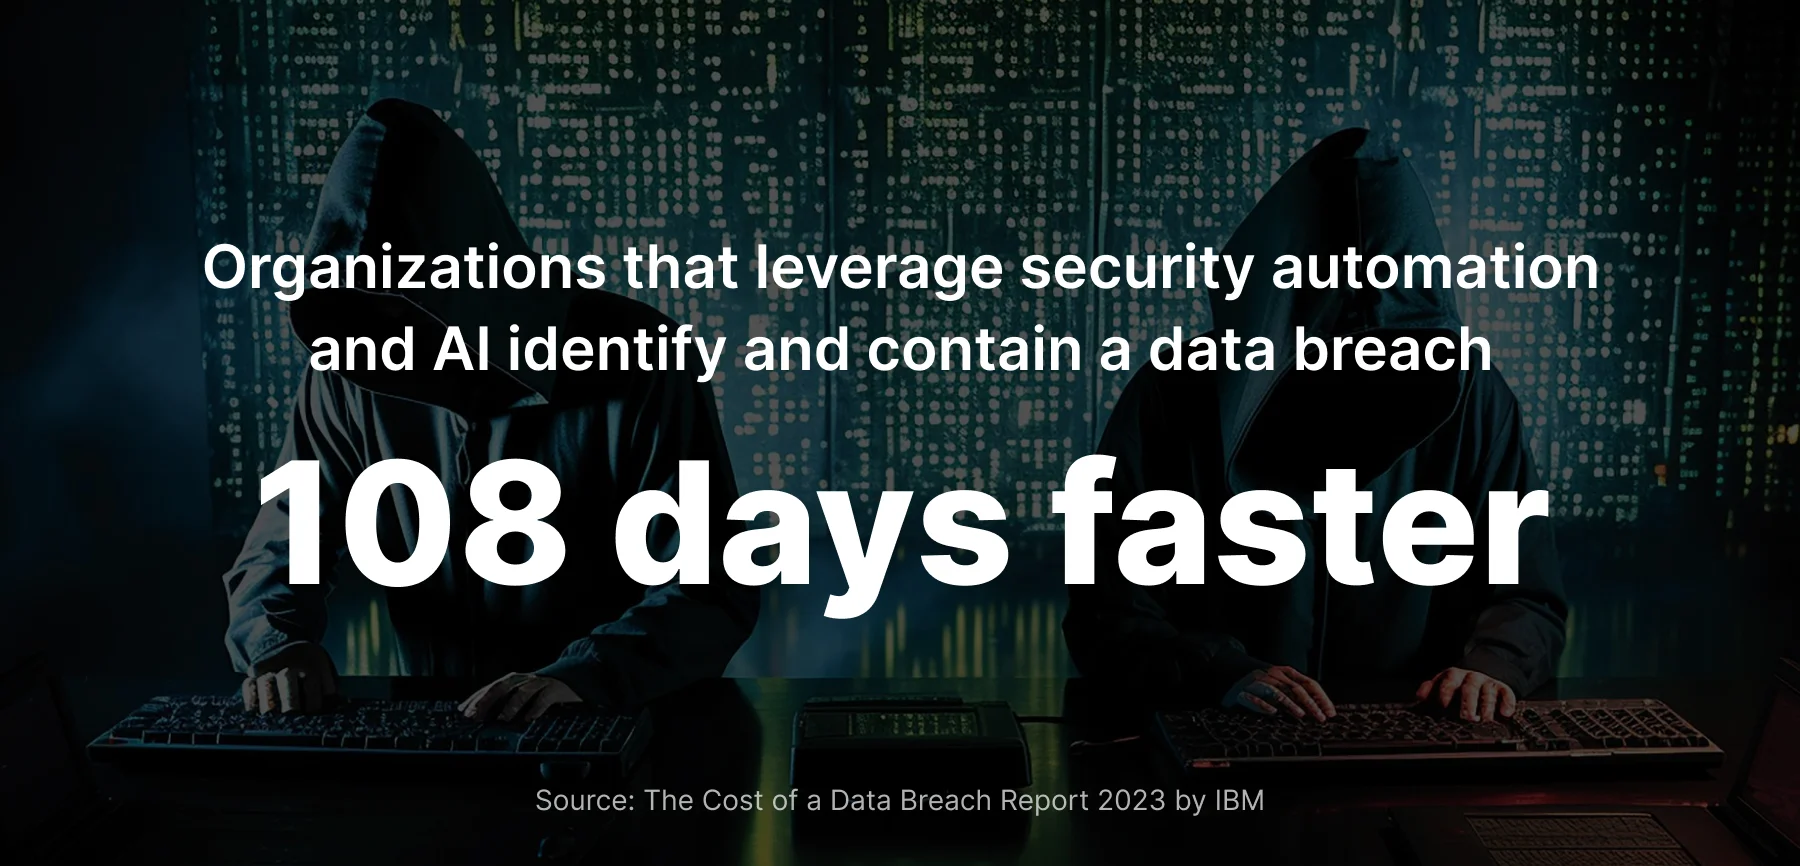 Organizations that leverage security automation and AI identify and contain a data breach 108 days faster